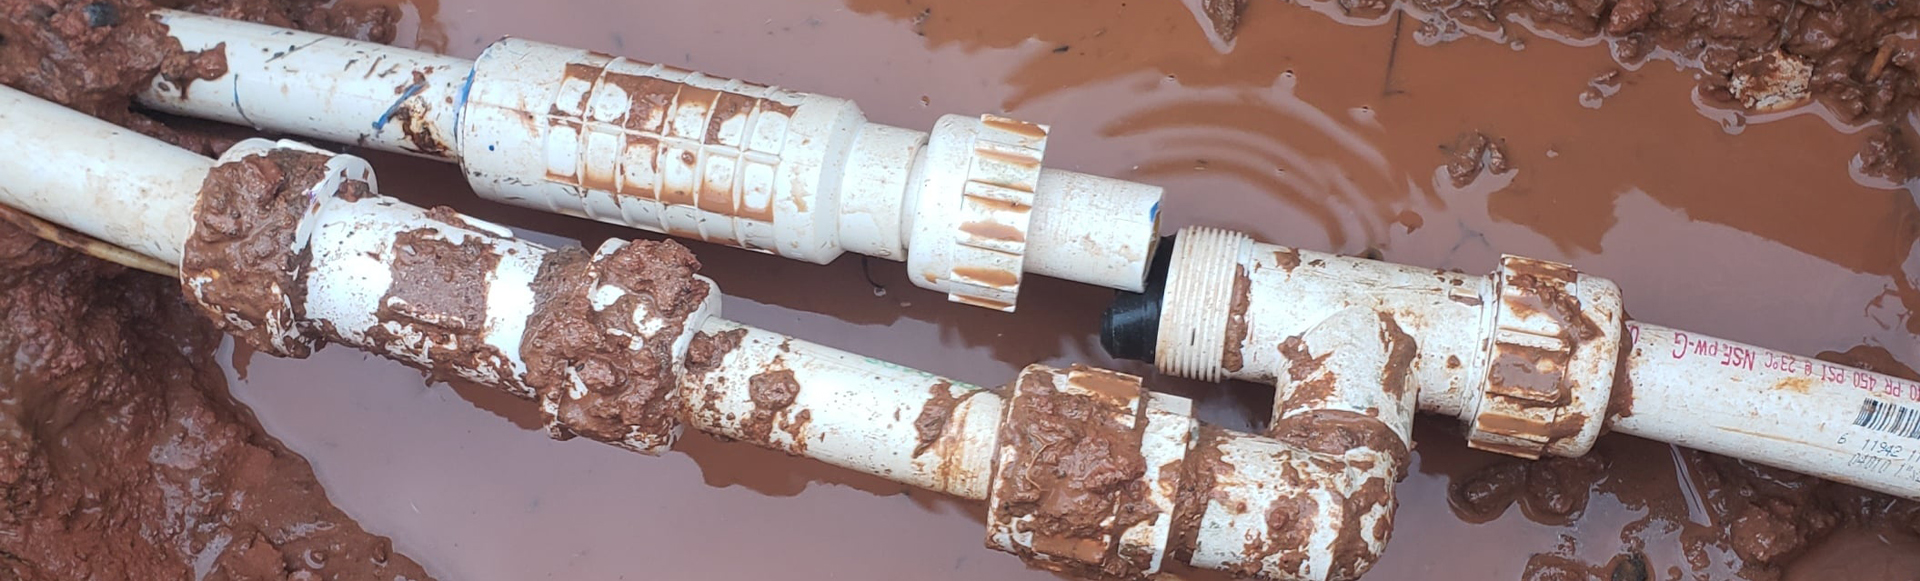 Water Service Line Preparation Pays Off for Maryland Homeowner